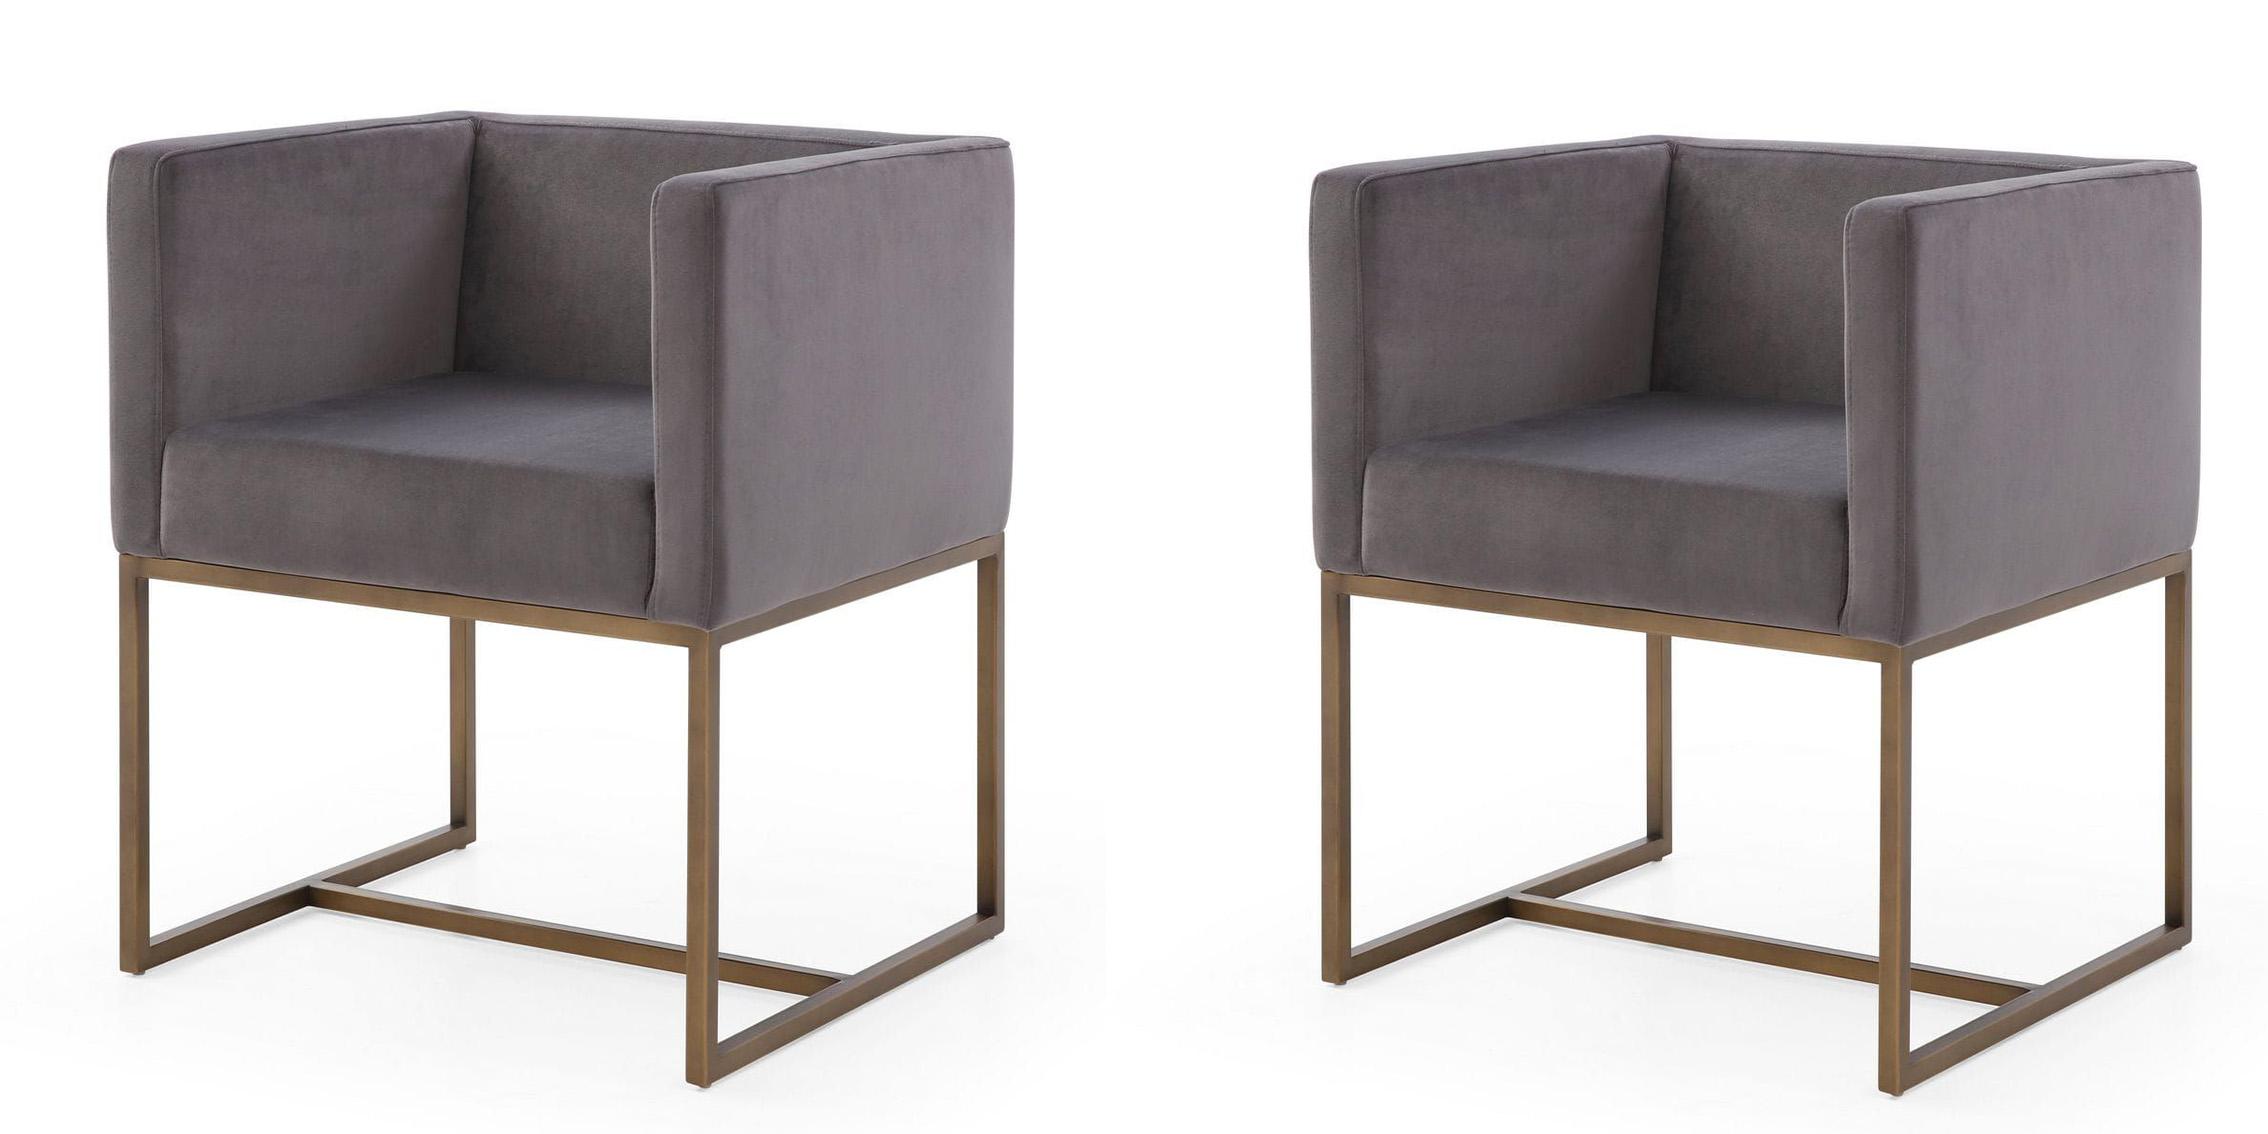 Contemporary, Modern Dining Chair Set VGVCB8368-DGRY-DC-Set-2 VGVCB8368-DGRY-DC-Set-2 in Gray, Copper Fabric